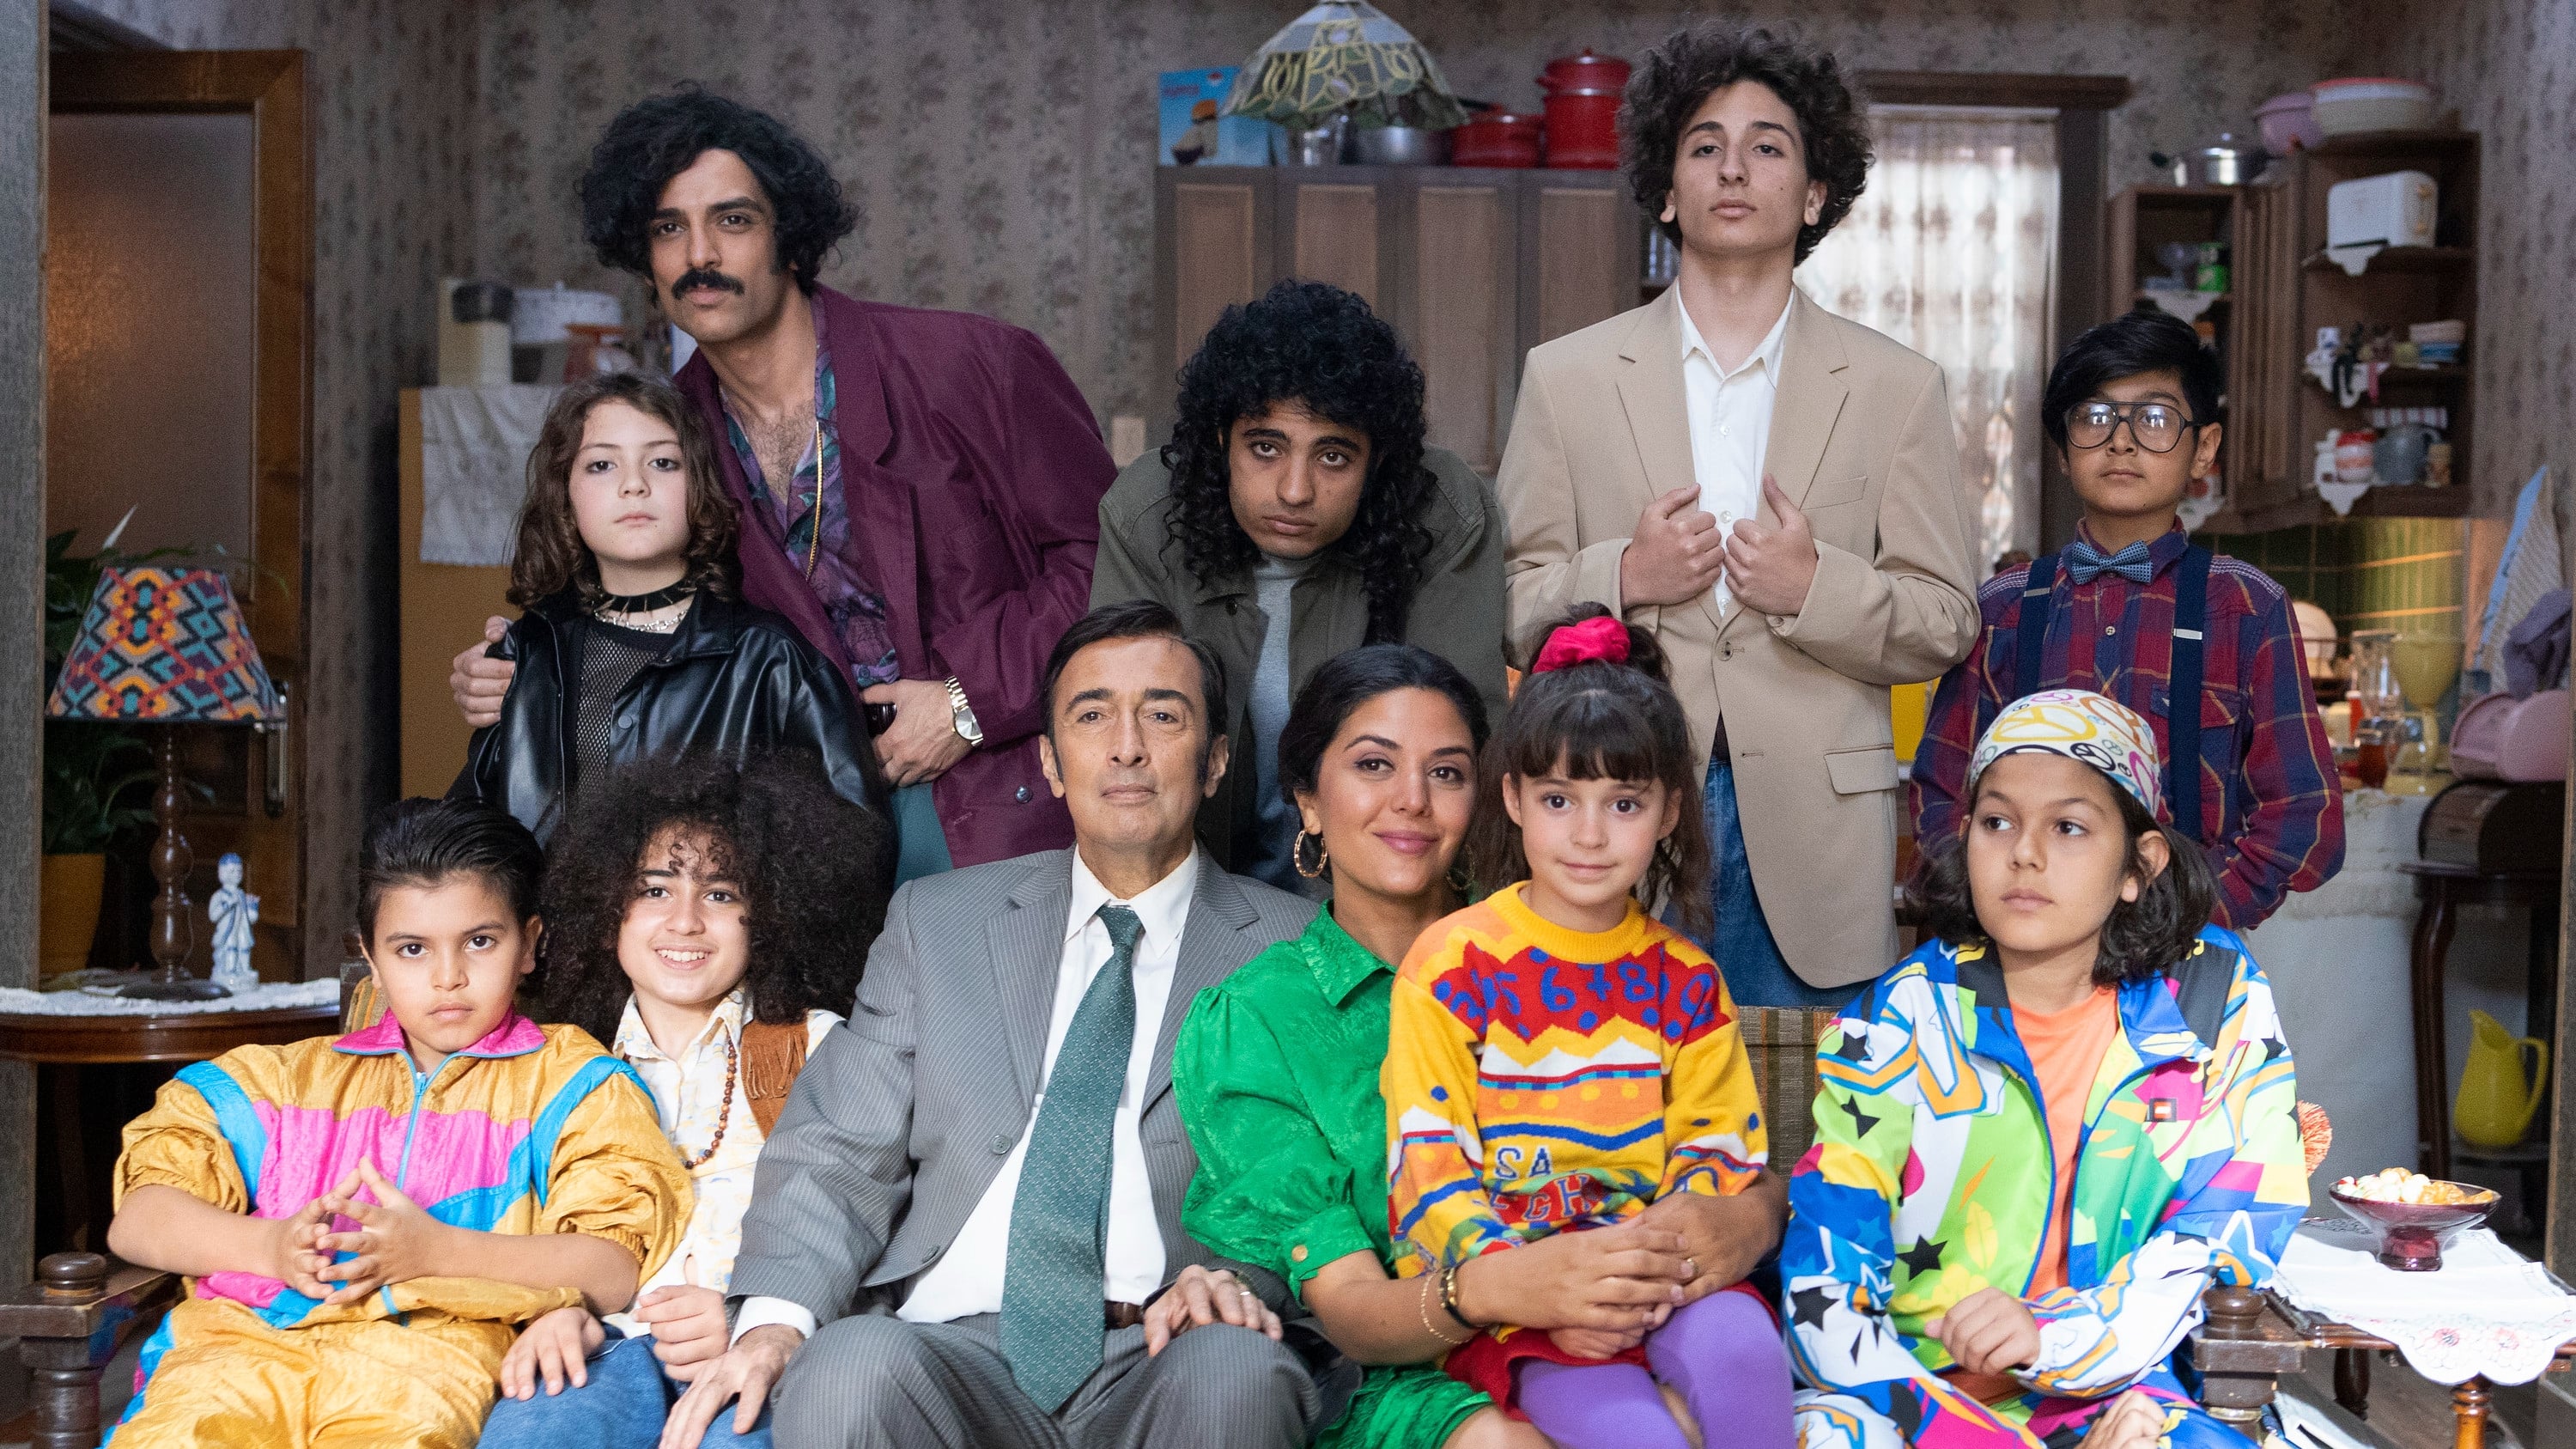 Still from The Persian Version: A large family gathered for a photo